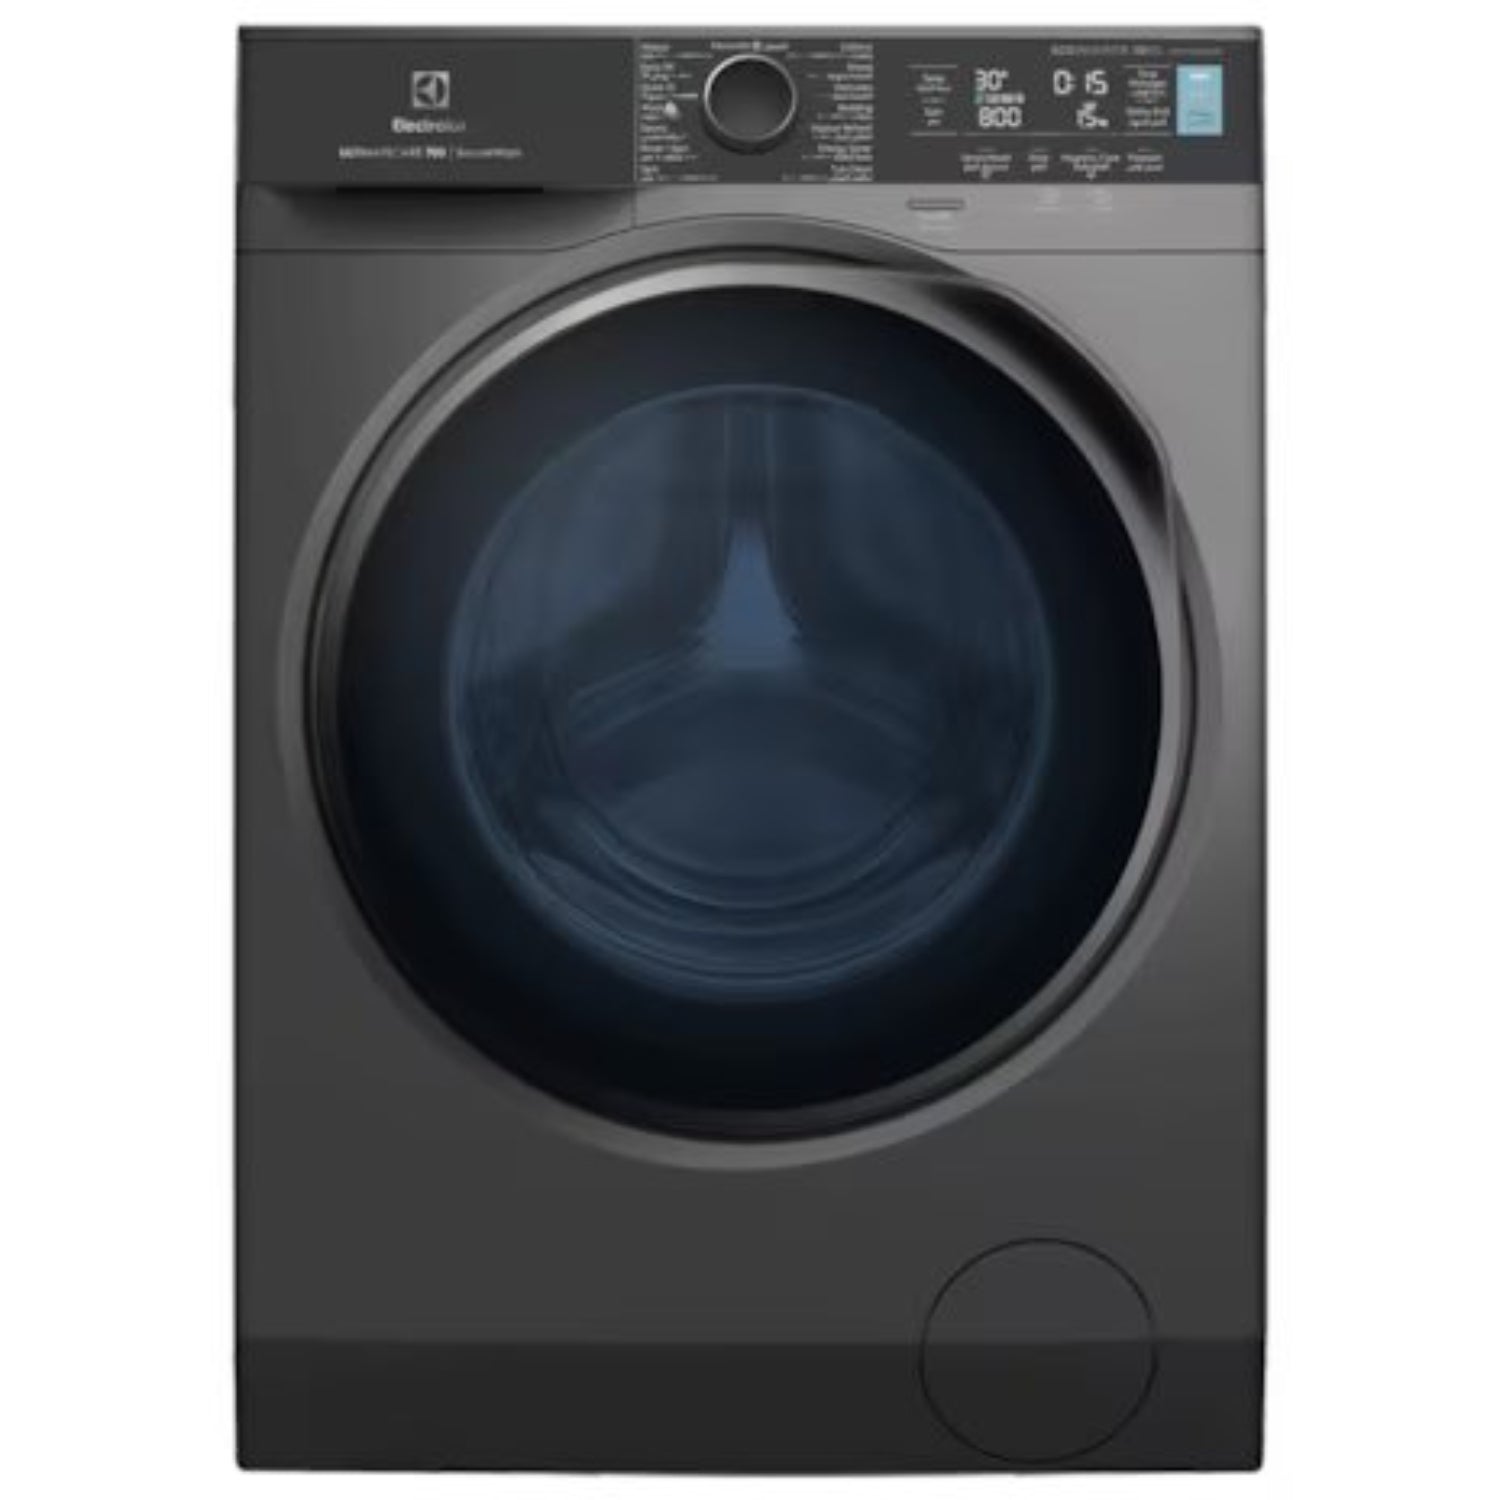 Electrolux 10kg Front Load Washing Machine, 1400 Rpm with PreMix Technology and Auto Sensor, Onyx Dark Silver, 10-year Warranty on EcoInverter Motor